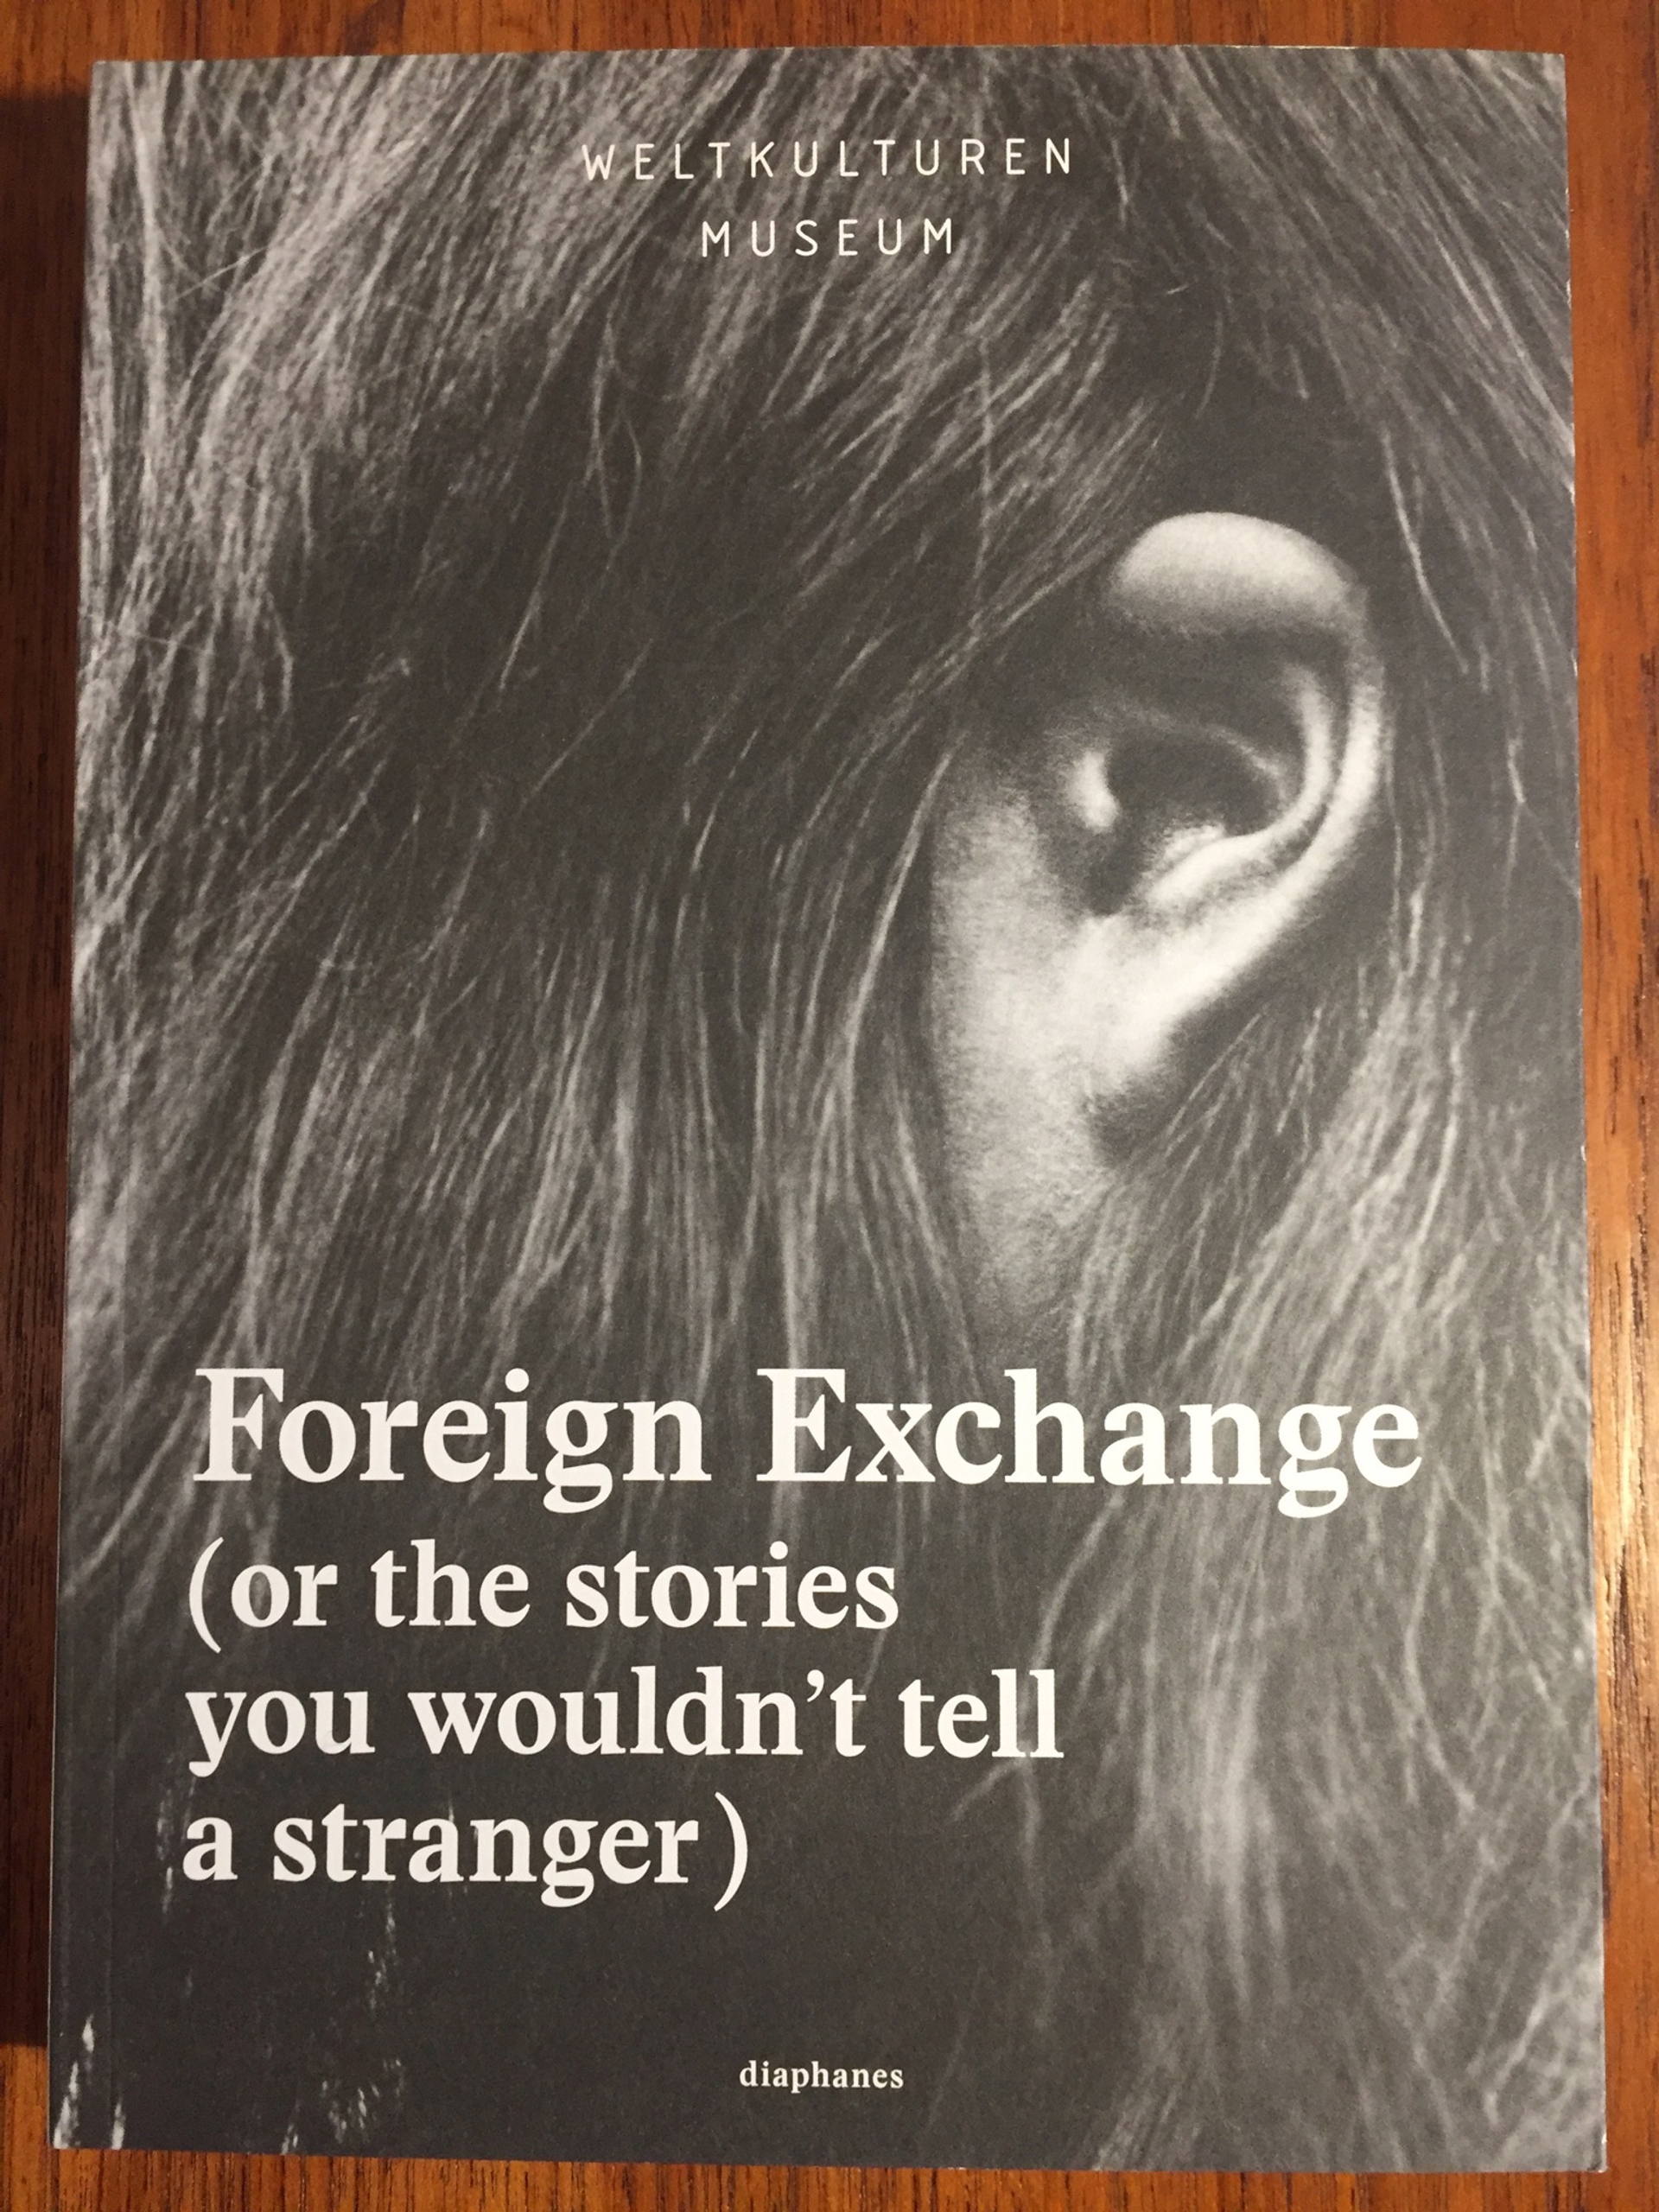 Cover of “Foreign Exchange (or the stories you wouldn’t tell a stranger”, edited by Clémentine Deliss and Yvette Mutumba, diaphanes 2014